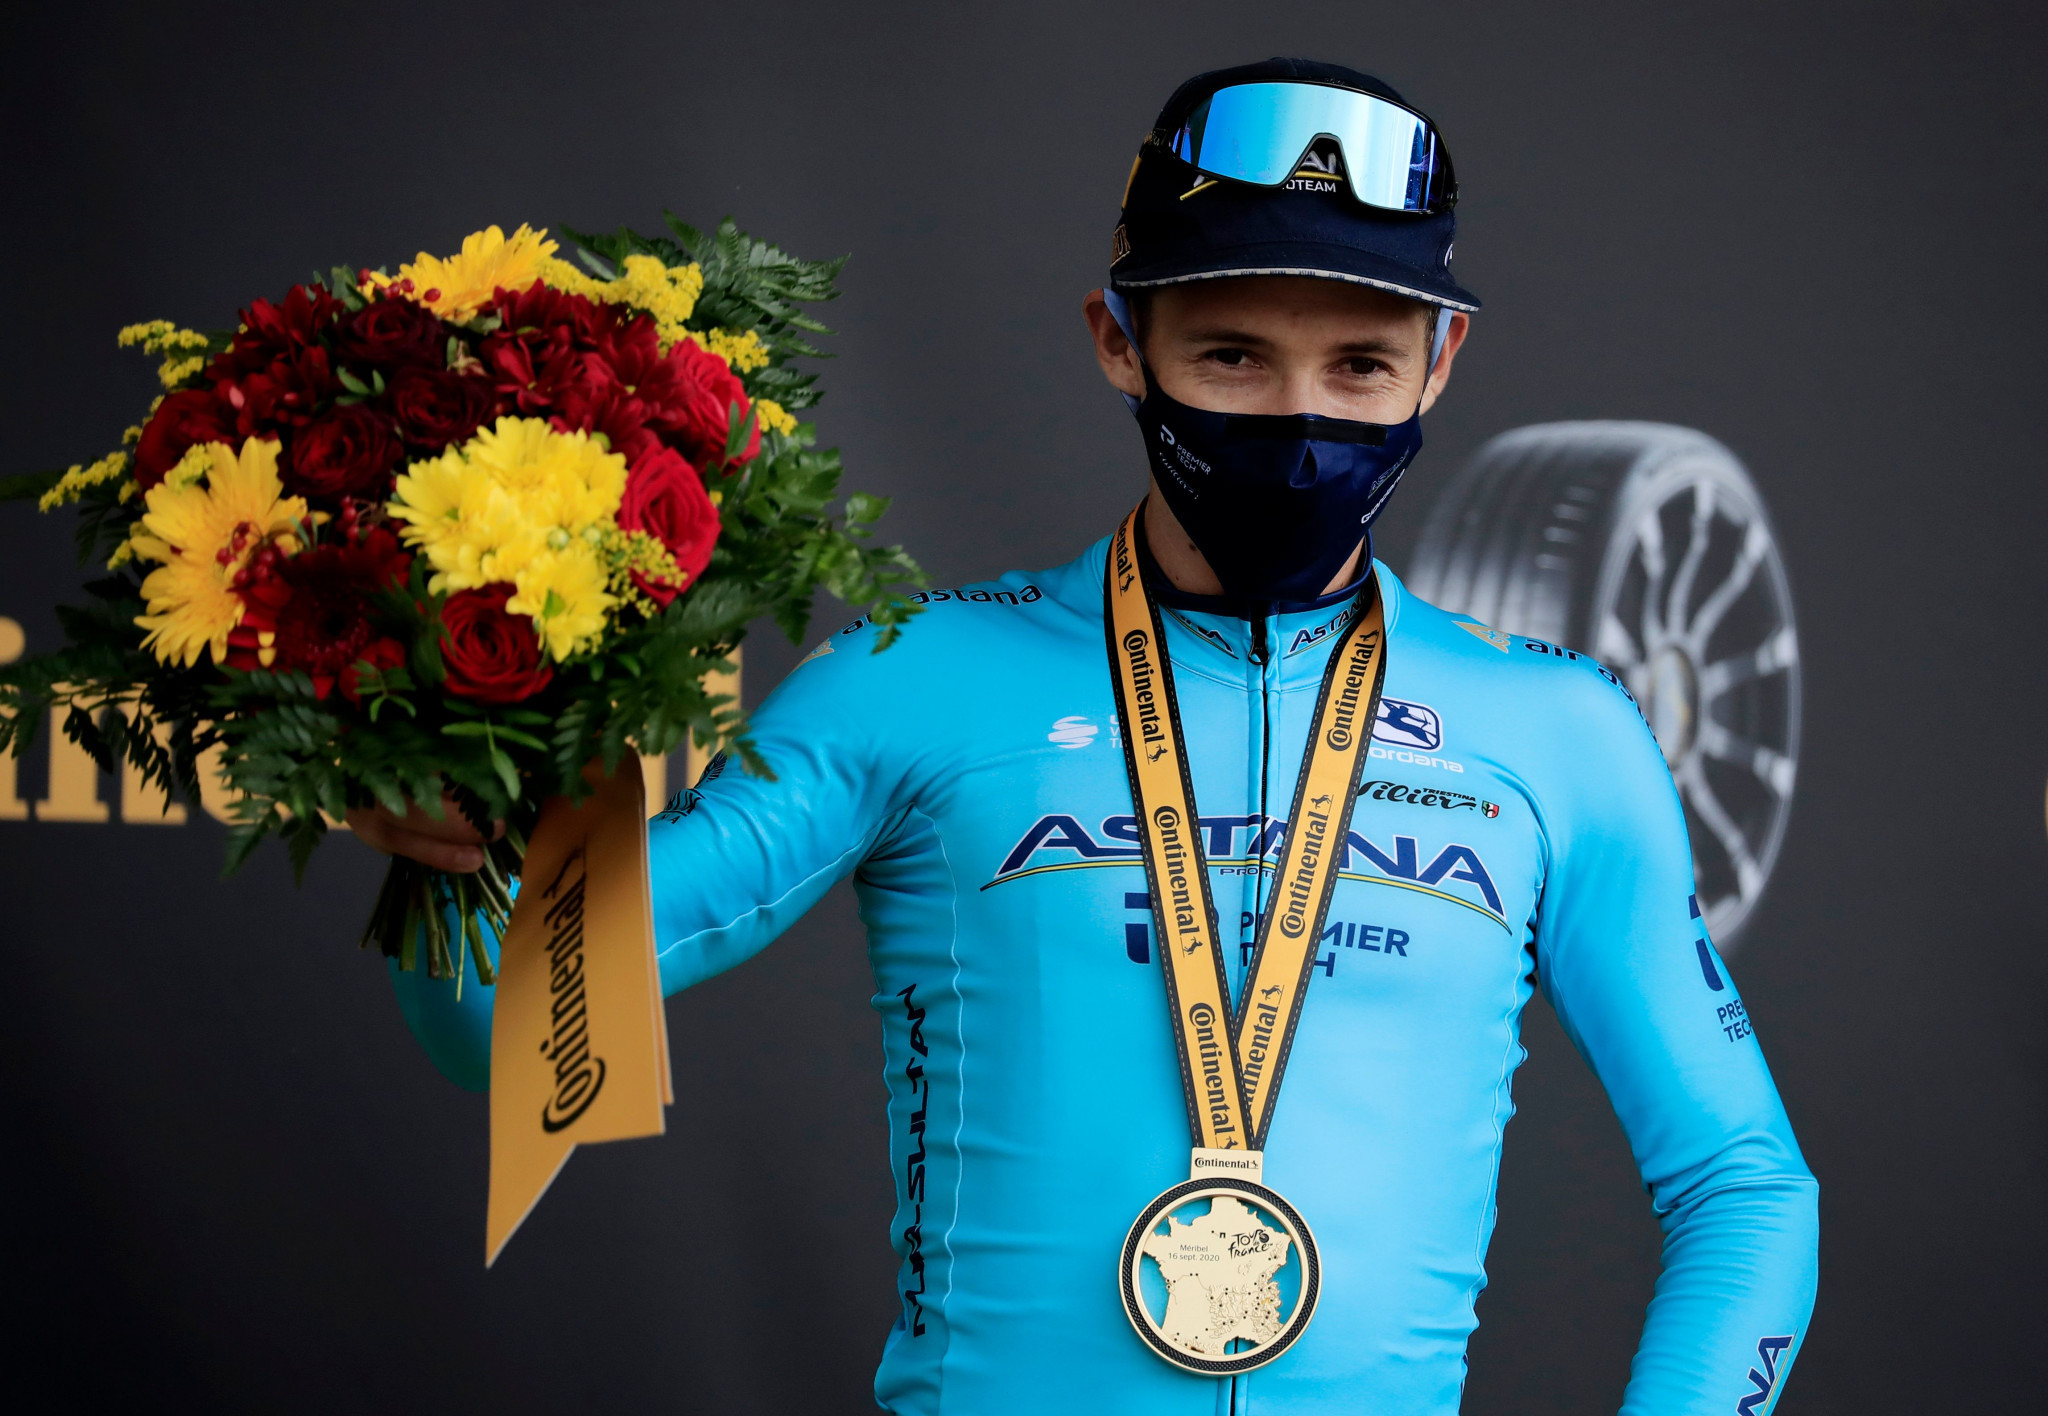 López masters the mountains to win stage 17 of Tour de France